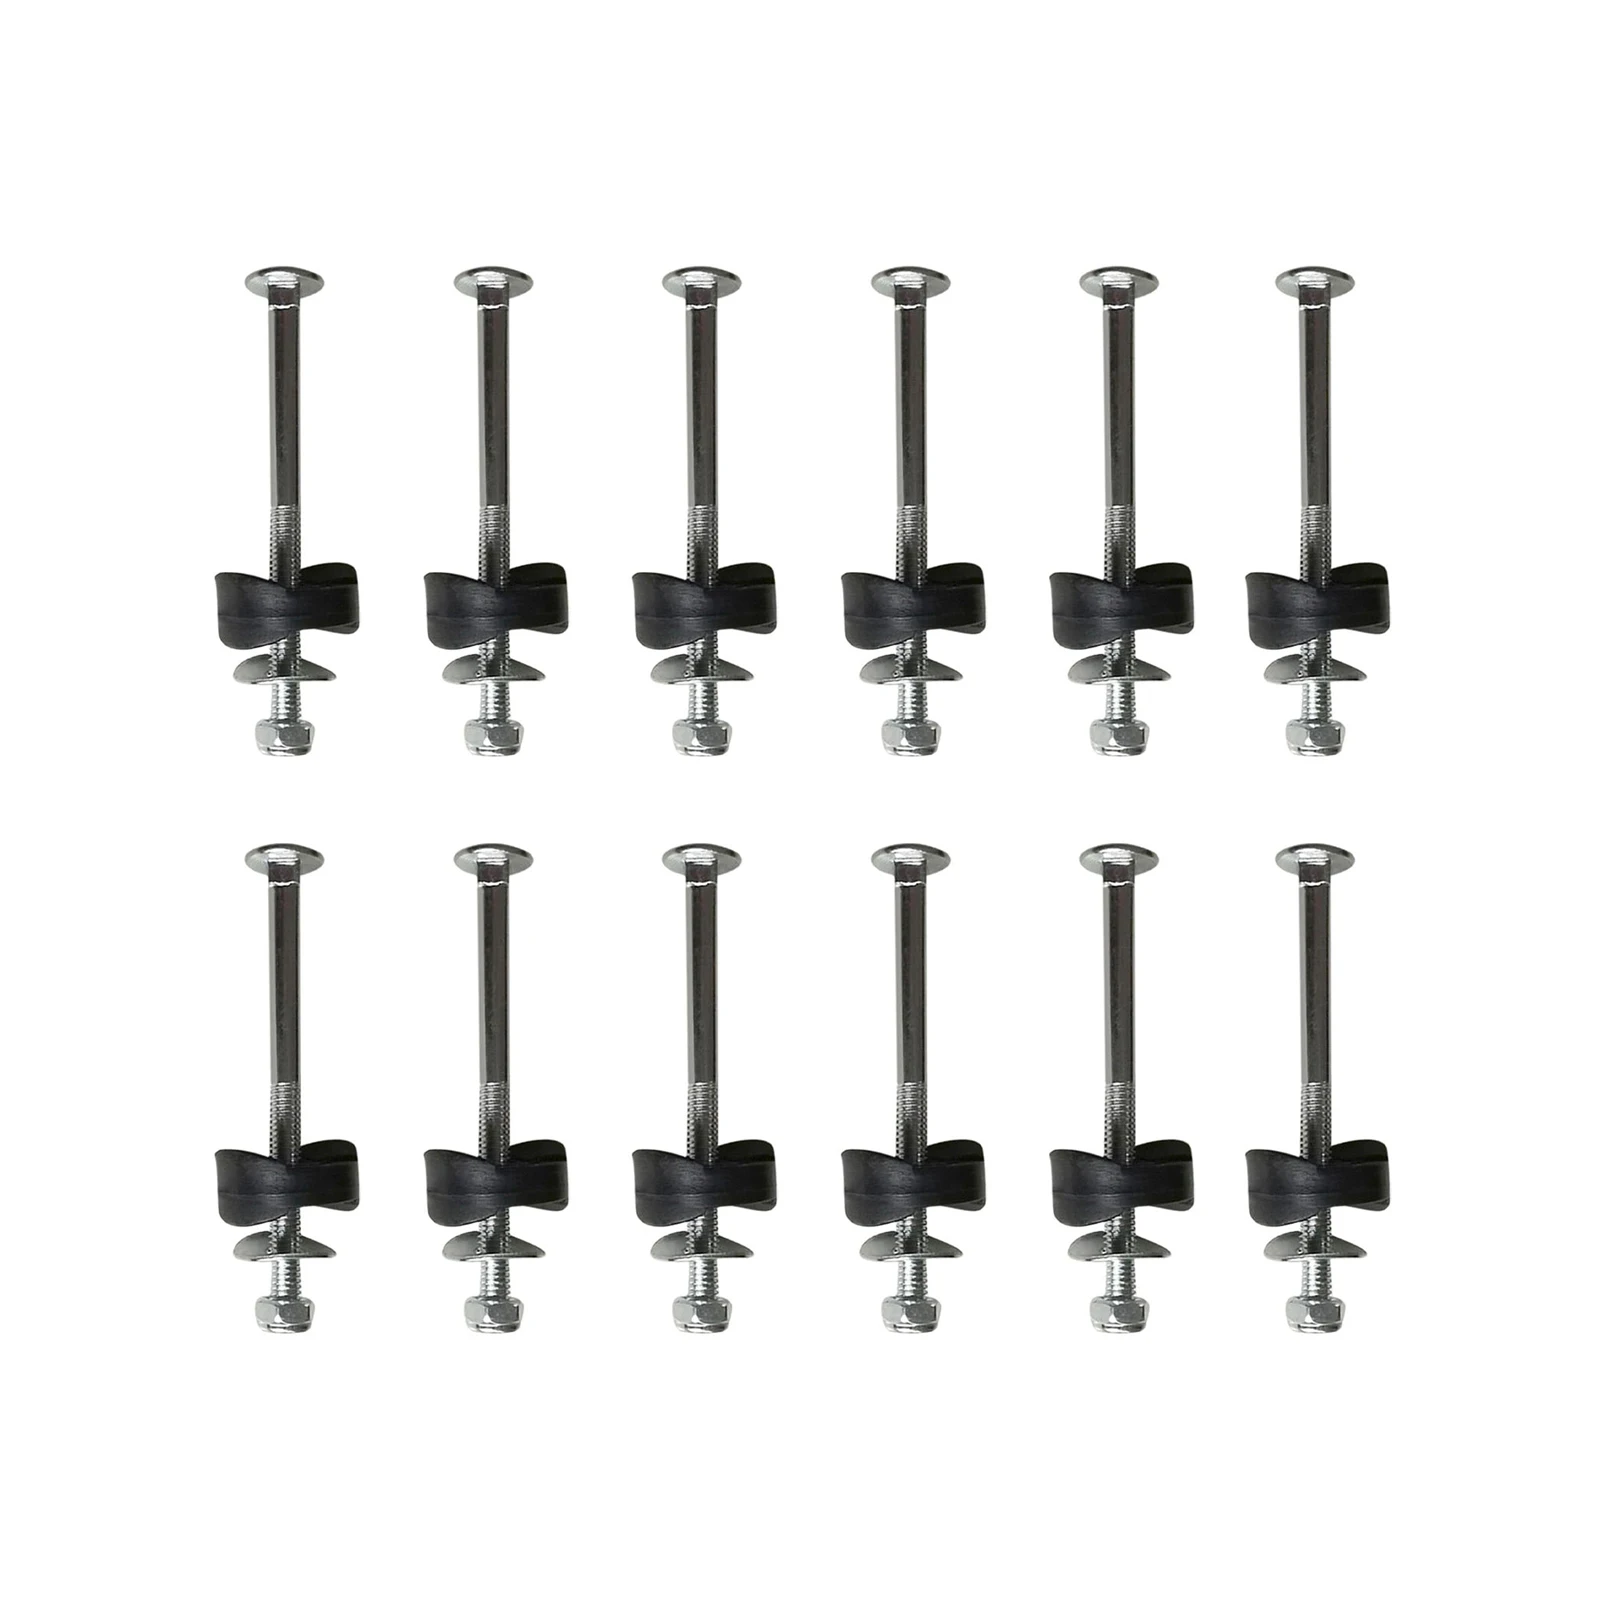 

12pcs Trampoline Screws Set For Attaching The Trampoline High Quality Strong Trampoline Fixing Screws Kit Stability Tool